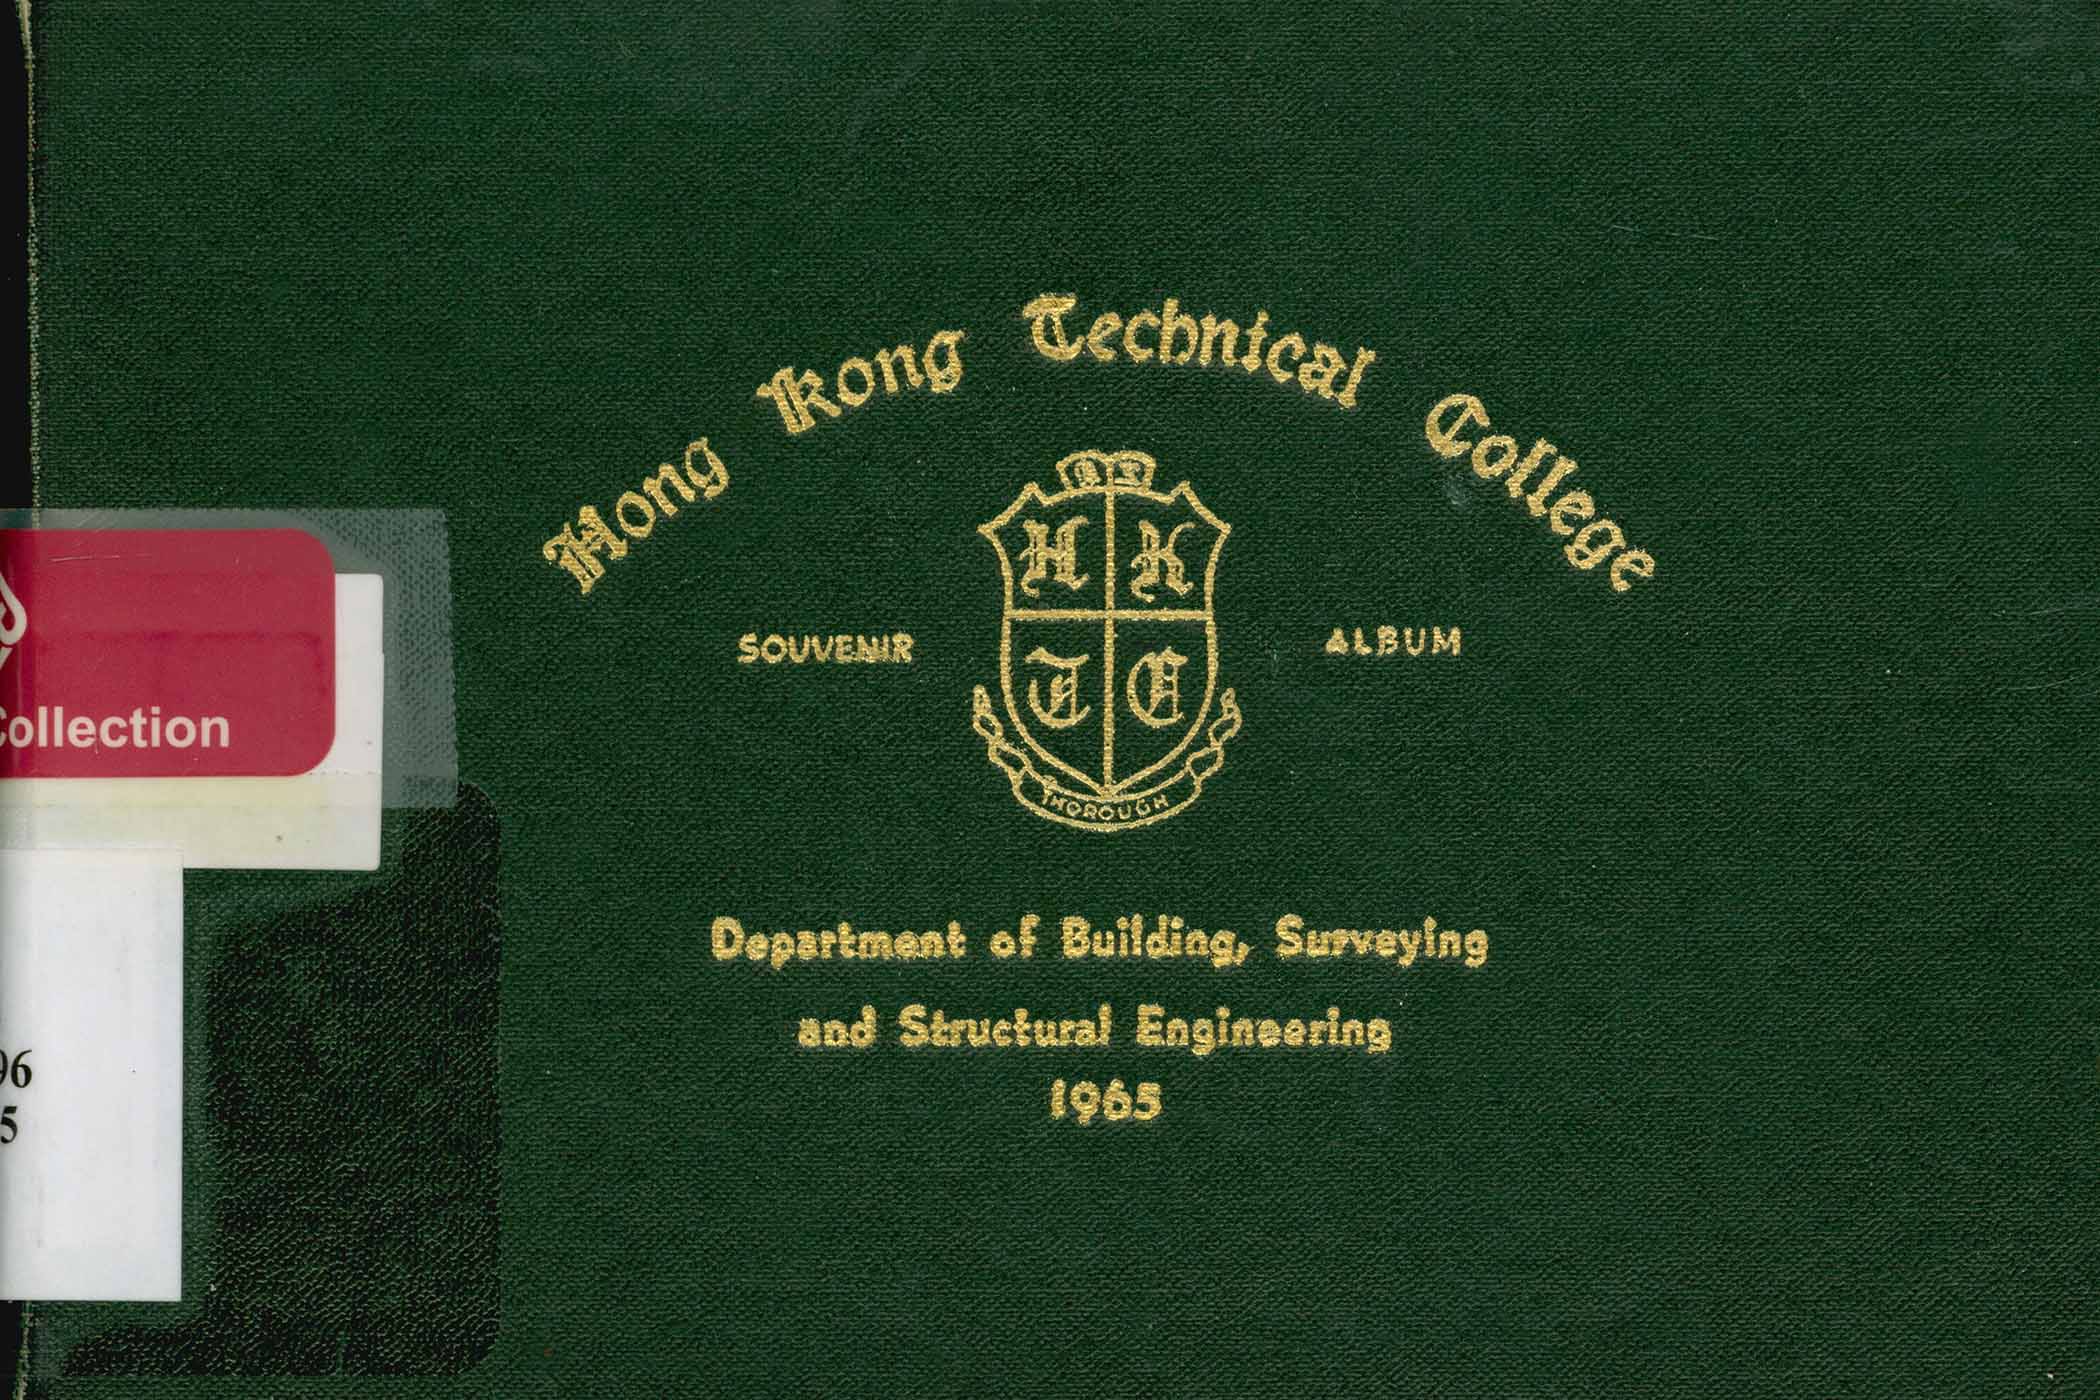 Hong Kong Technical College. Department of Building, Surveying and Structural Engineering.  Souvenir album: 1965